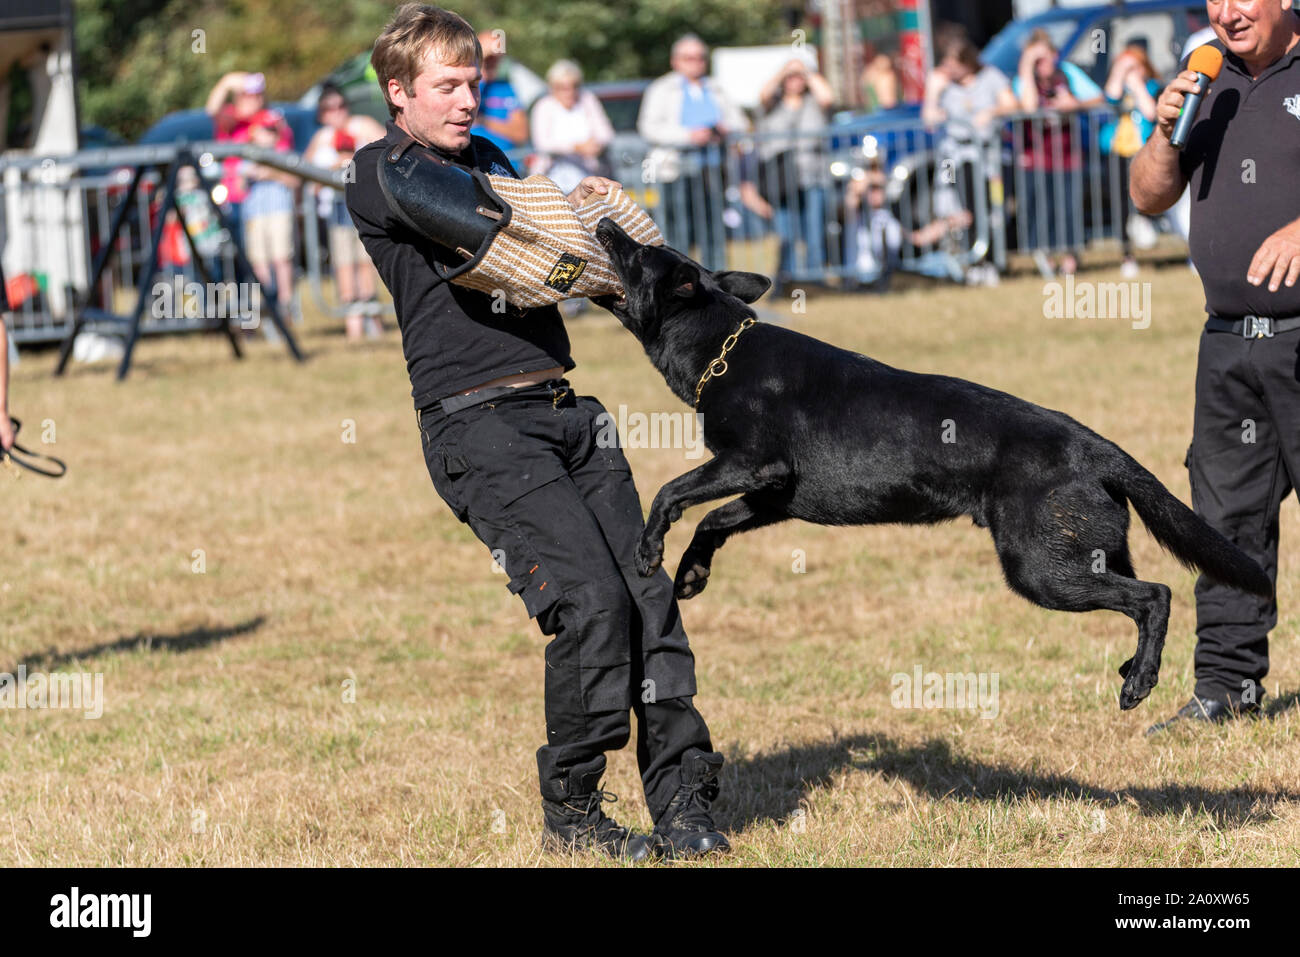 Dog attack simulation training. Conquest K9 dog display at the National Country Show Live at Hylands Park, Chelmsford, Essex, UK. Dog agility Stock Photo